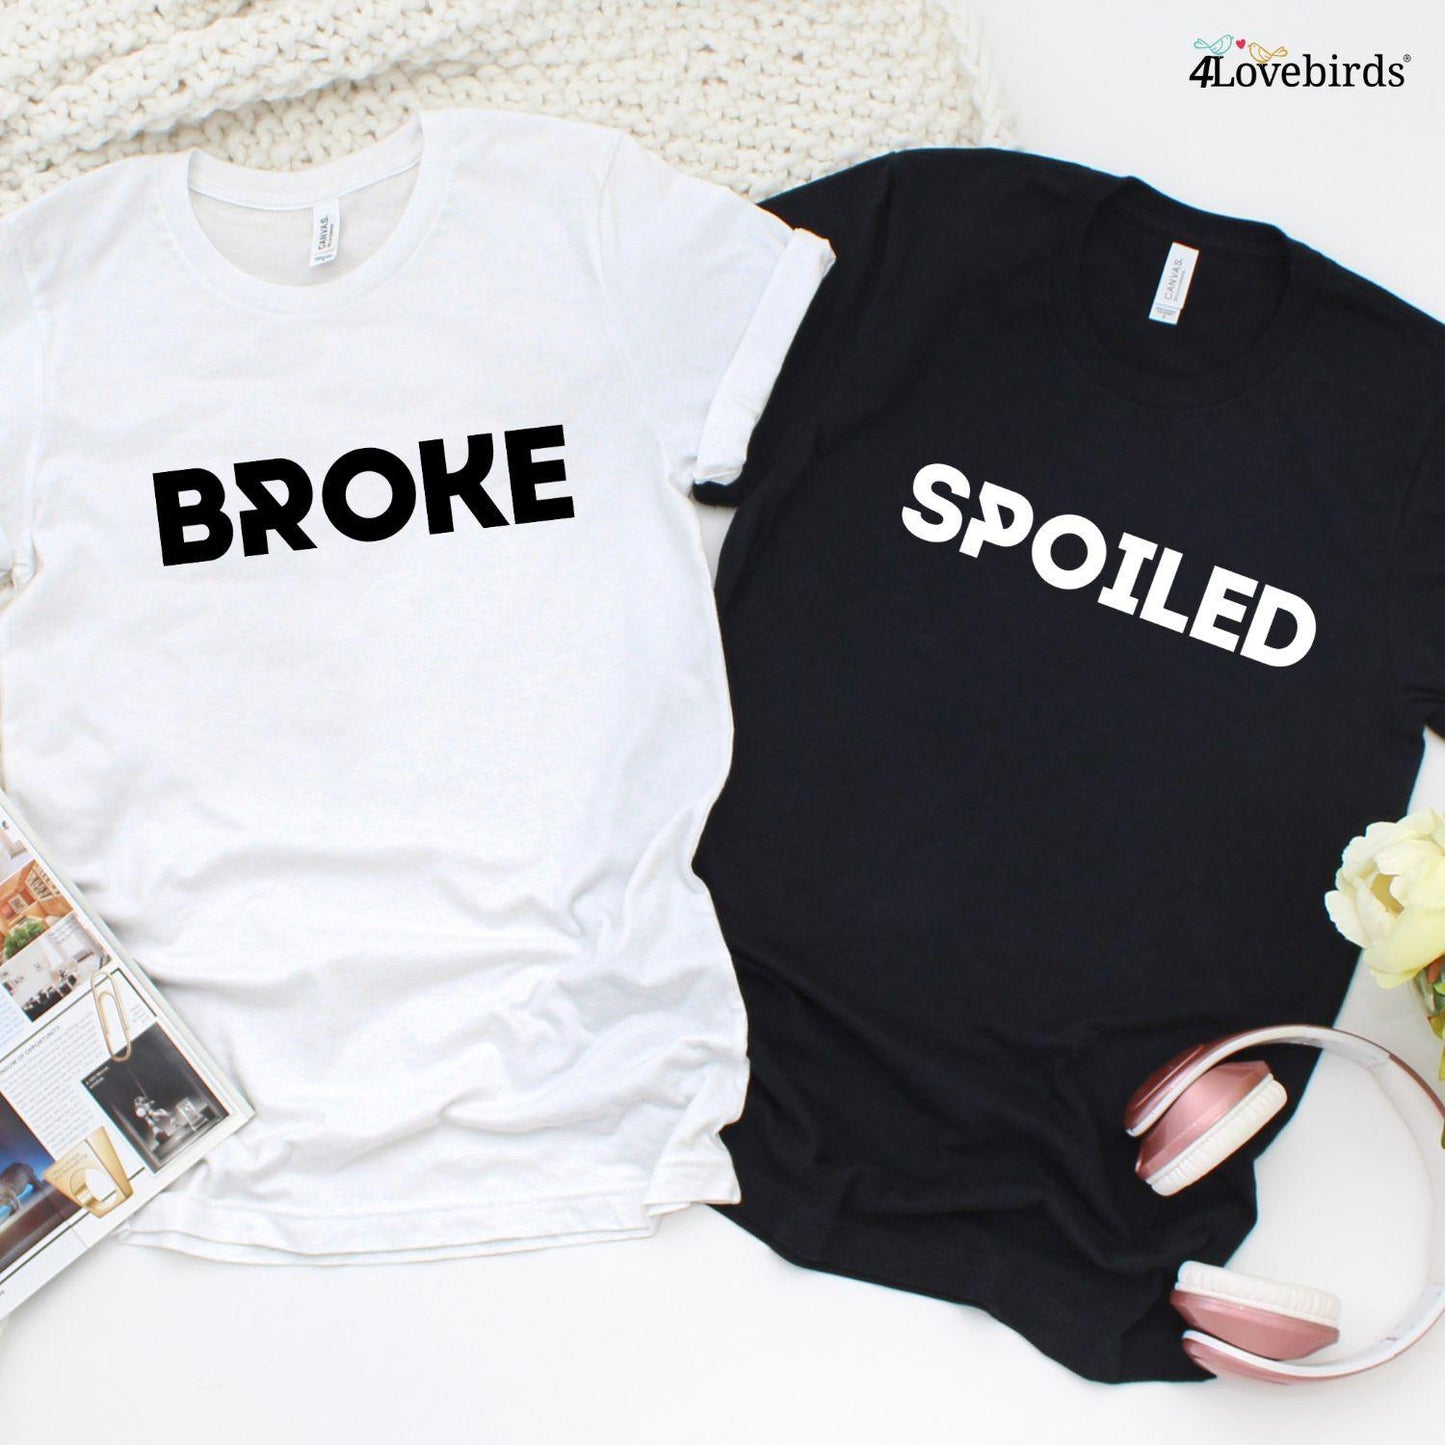 Matching Set: Broke and Spoiled Gift for Couples - Funny Valentine Outfit for Boyfriend and Girlfriend - 4Lovebirds